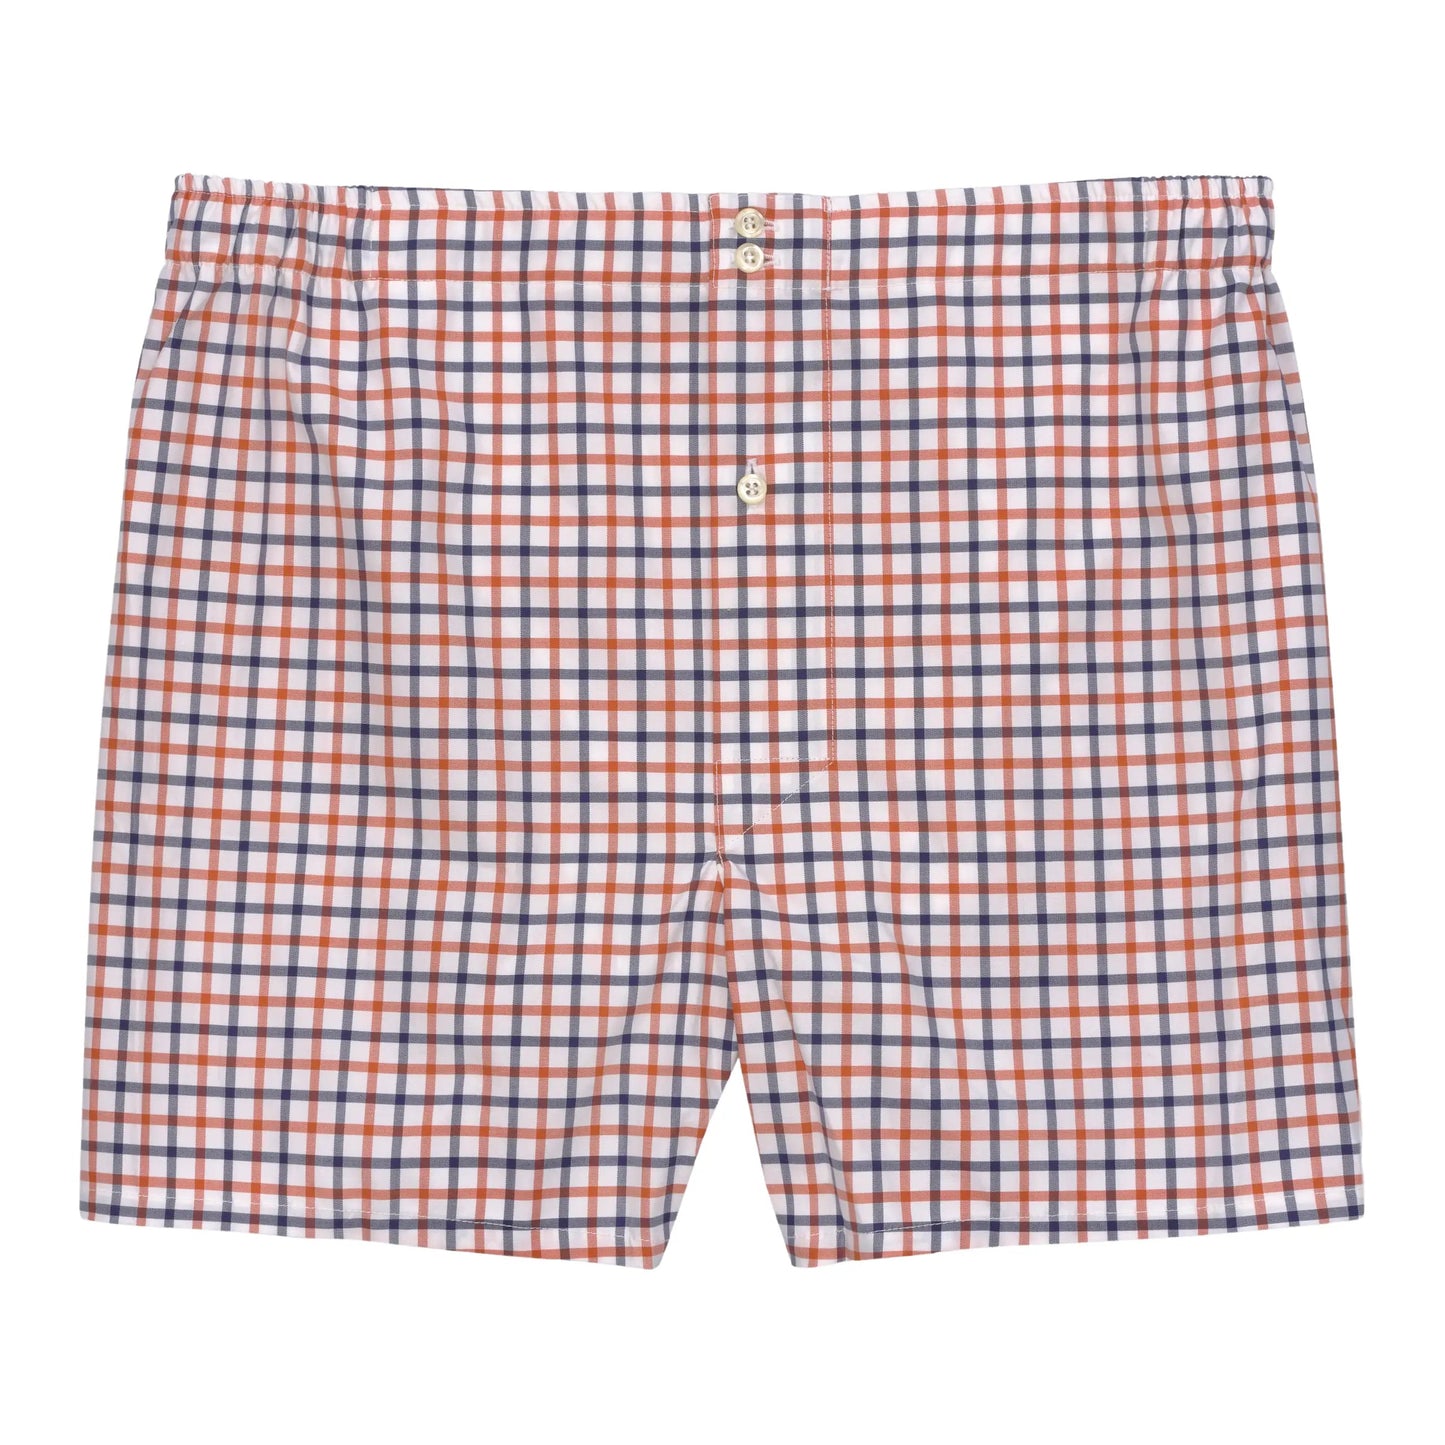 Emanuele Maffeis White Checked Boxer Shorts in Blue and Orange - SARTALE